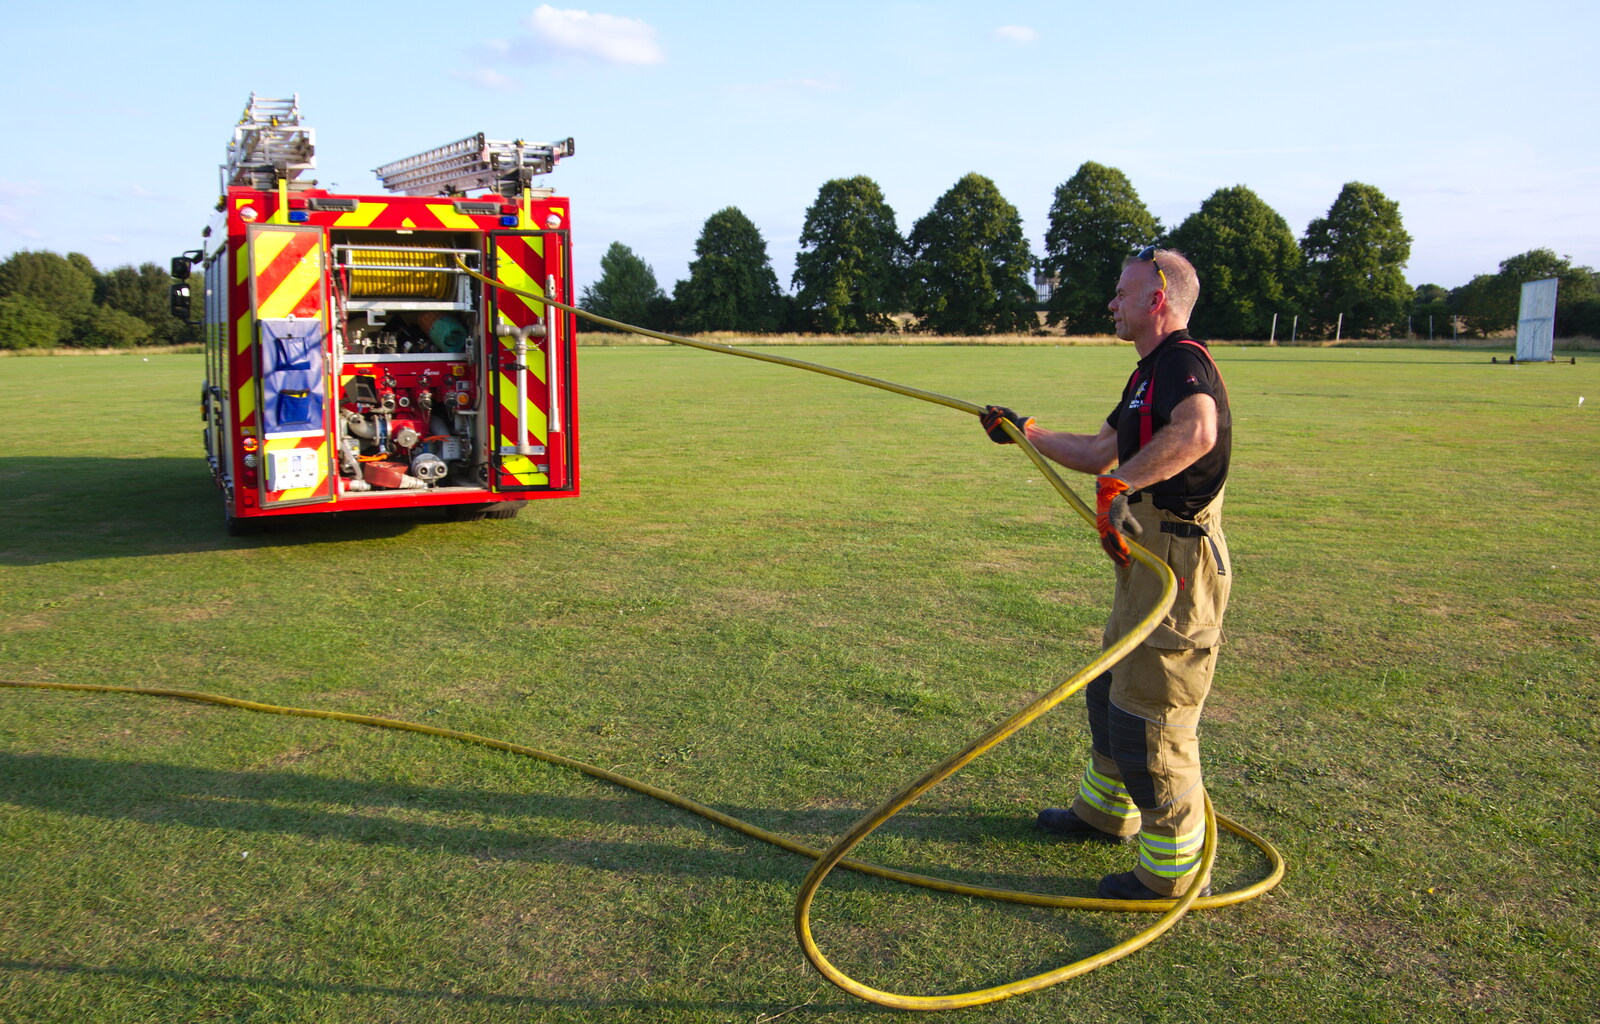 The crew unwind the hosepipe from A Water Fight with a Fire Engine, Eye Cricket Club, Suffolk - 5th August 2019